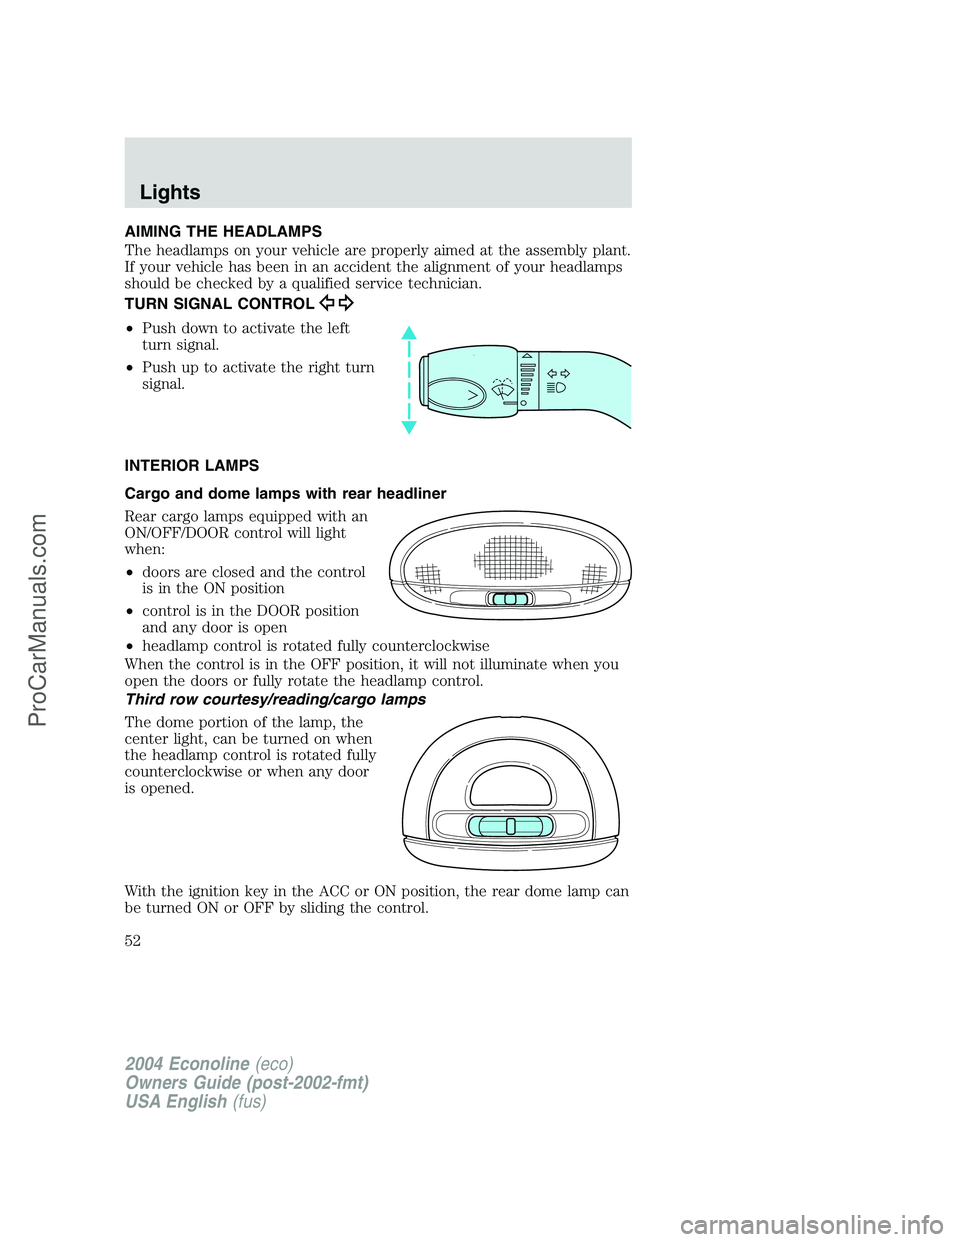 FORD E-450 2004  Owners Manual AIMING THE HEADLAMPS
The headlamps on your vehicle are properly aimed at the assembly plant.
If your vehicle has been in an accident the alignment of your headlamps
should be checked by a qualified se